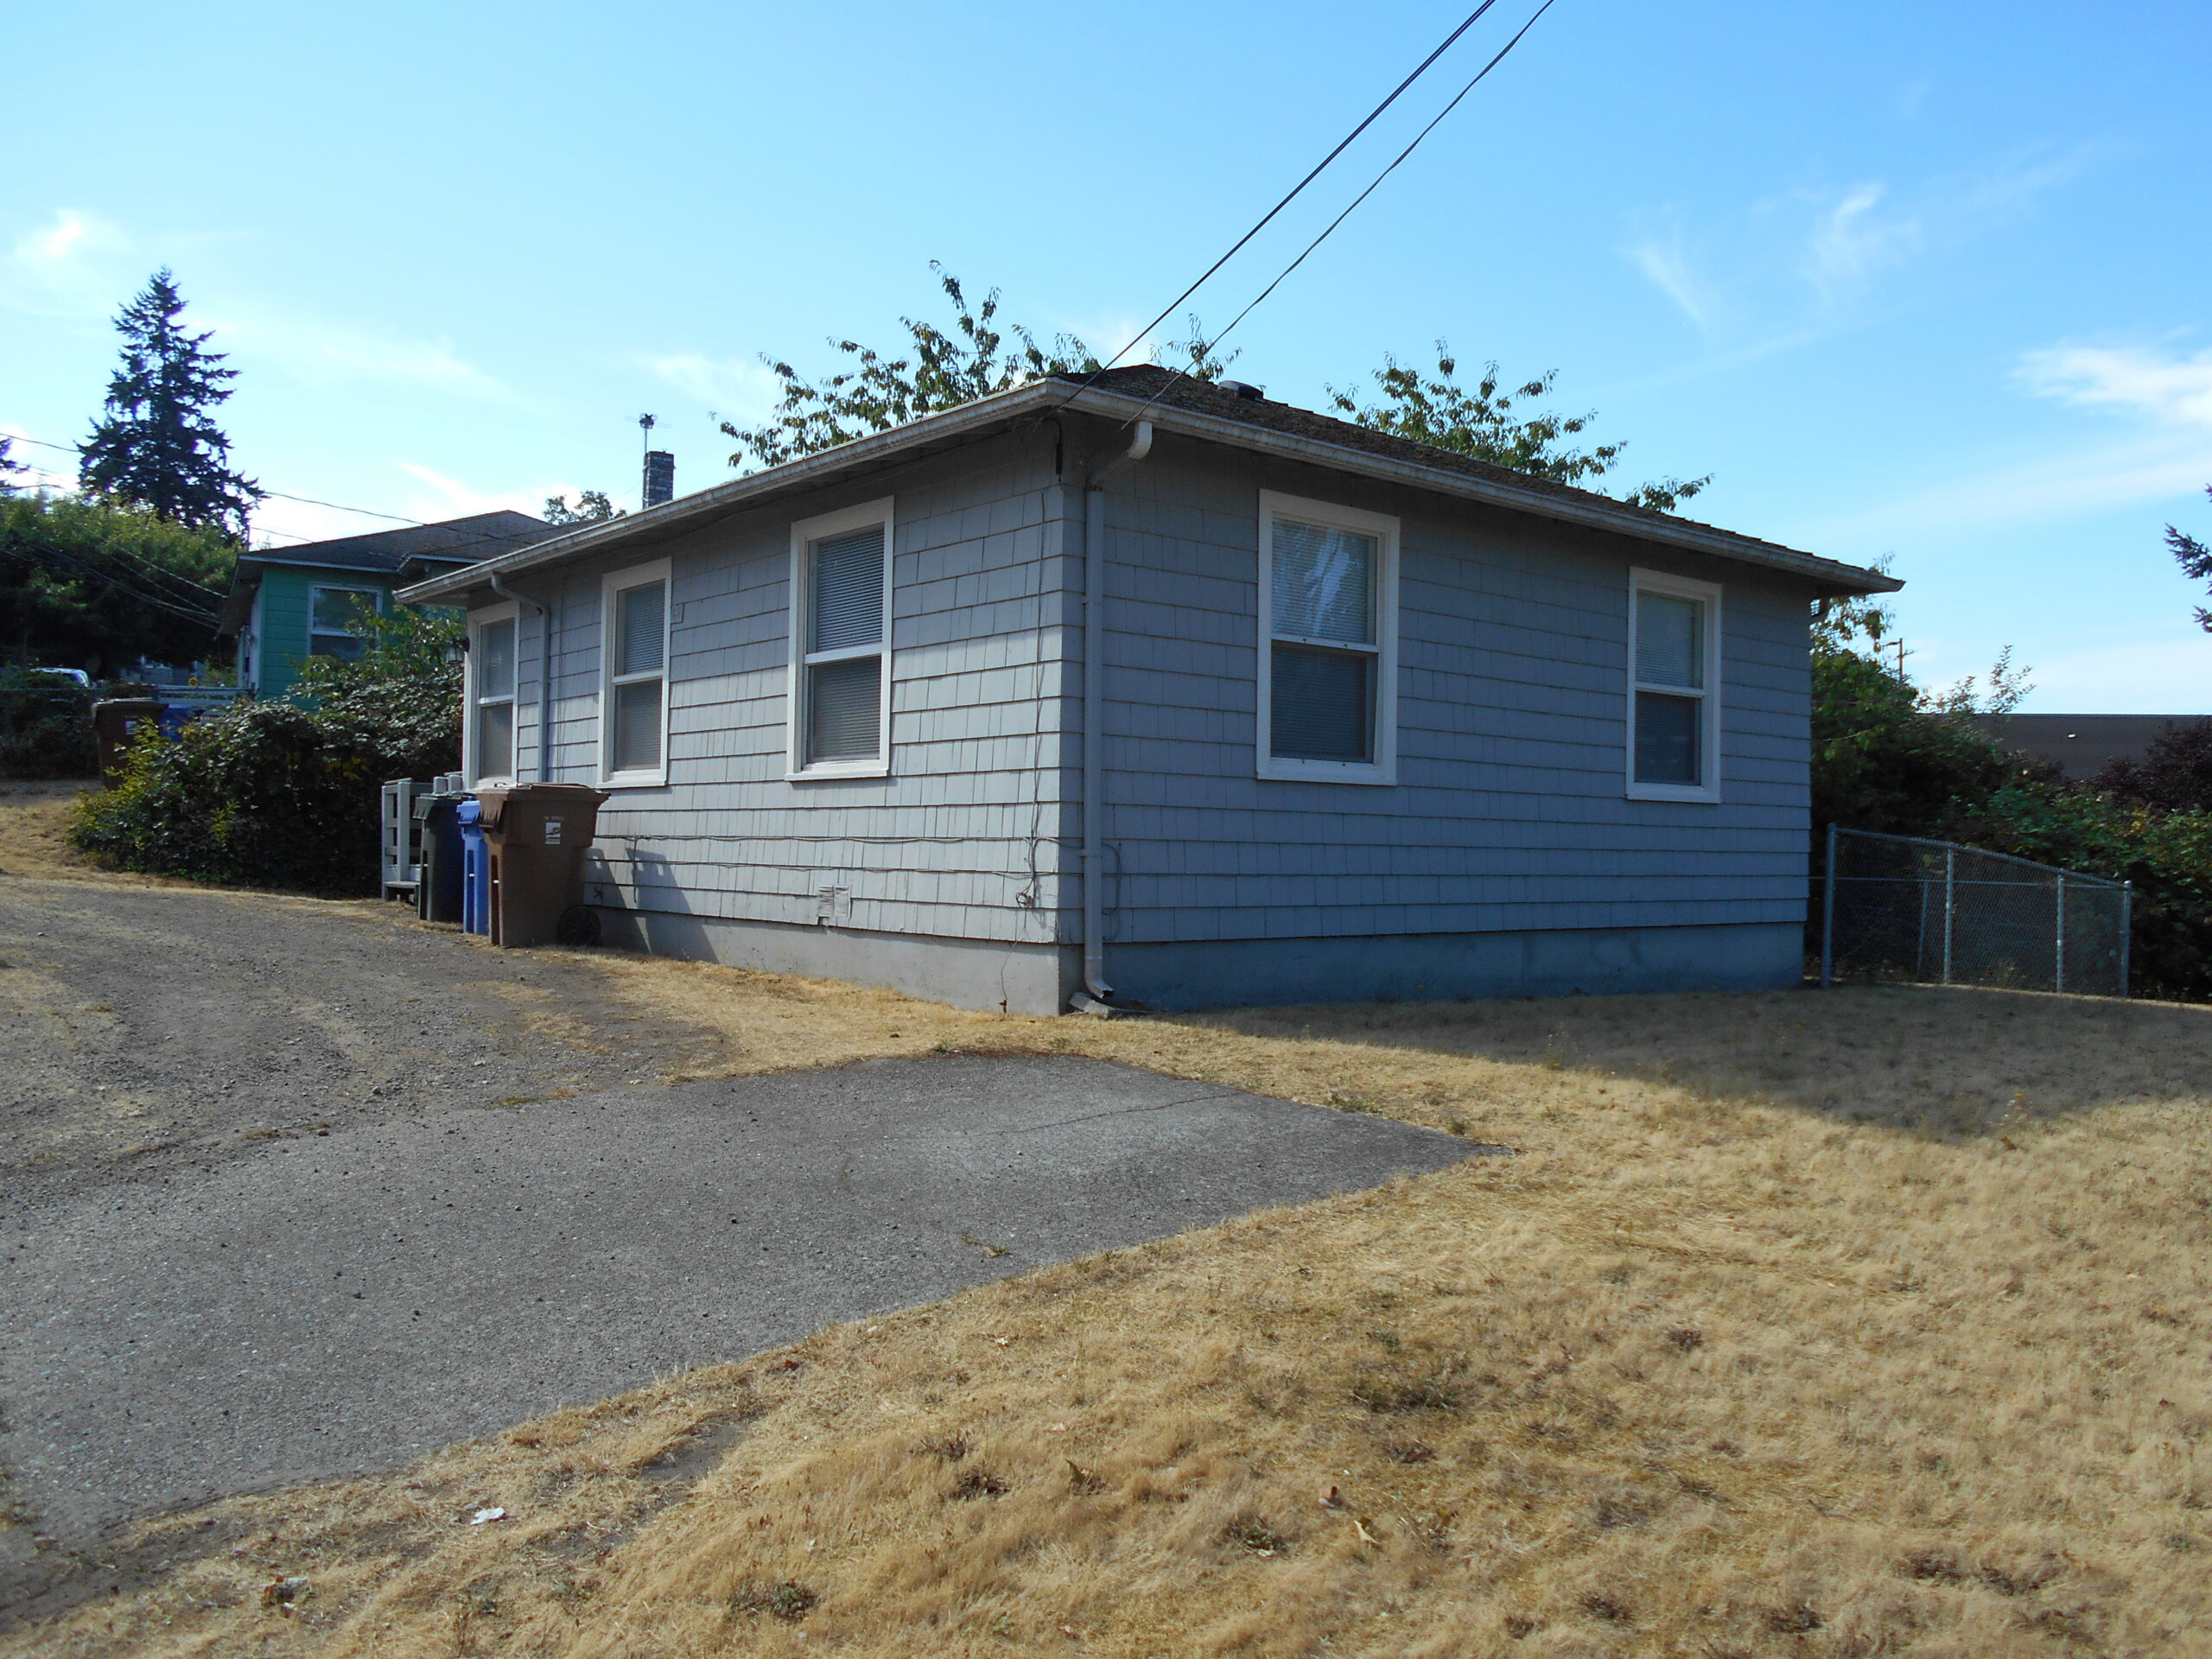 R-62 $1,550 – Remodeled 2 Bedroom House in Tacoma